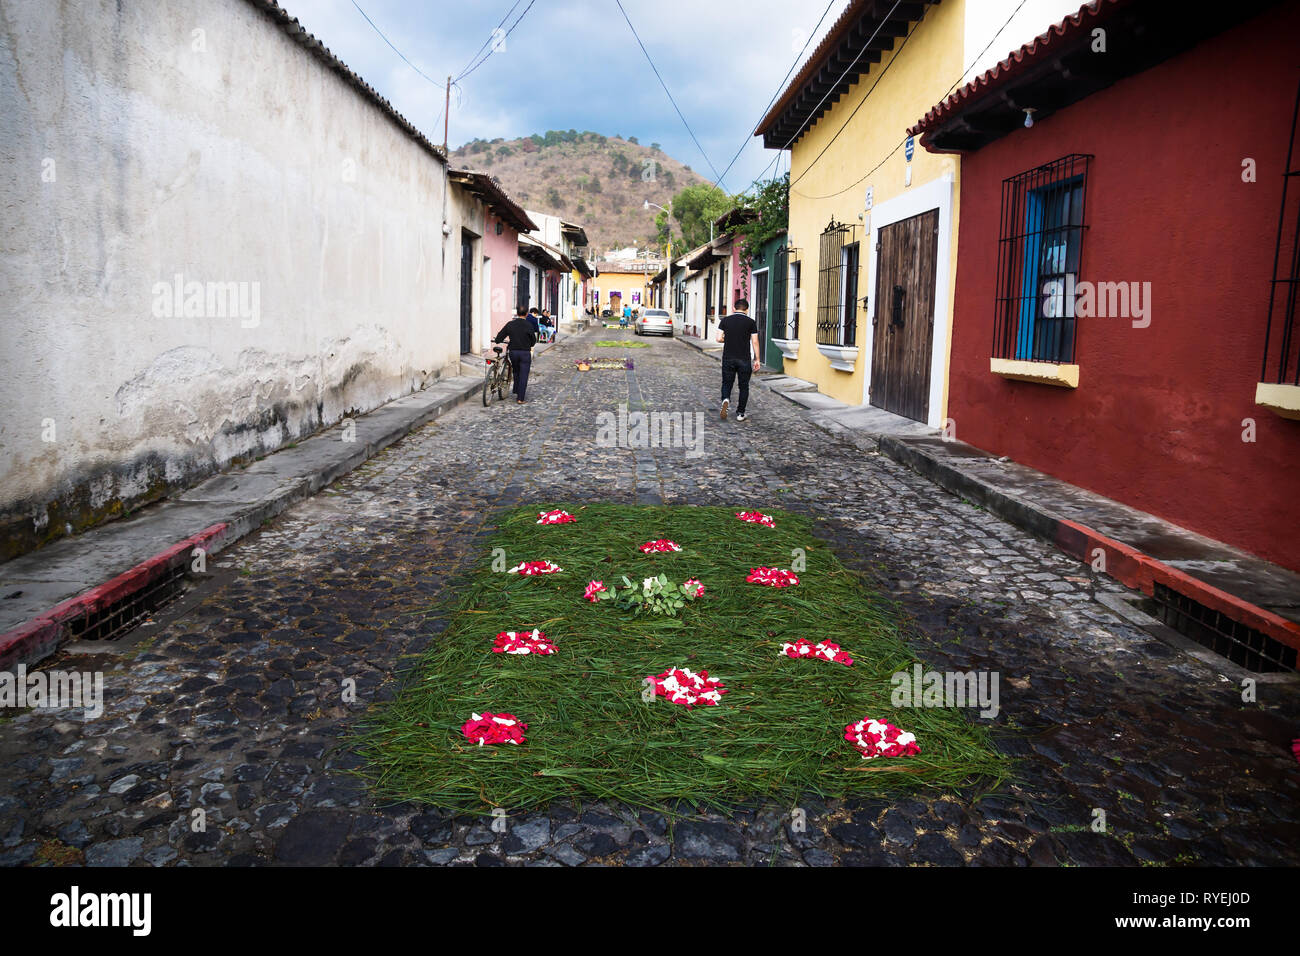 Antigua, Guatamala - 23 March 2018: Grass Alfombre colourful flower carpets on the cobbled streets Stock Photo